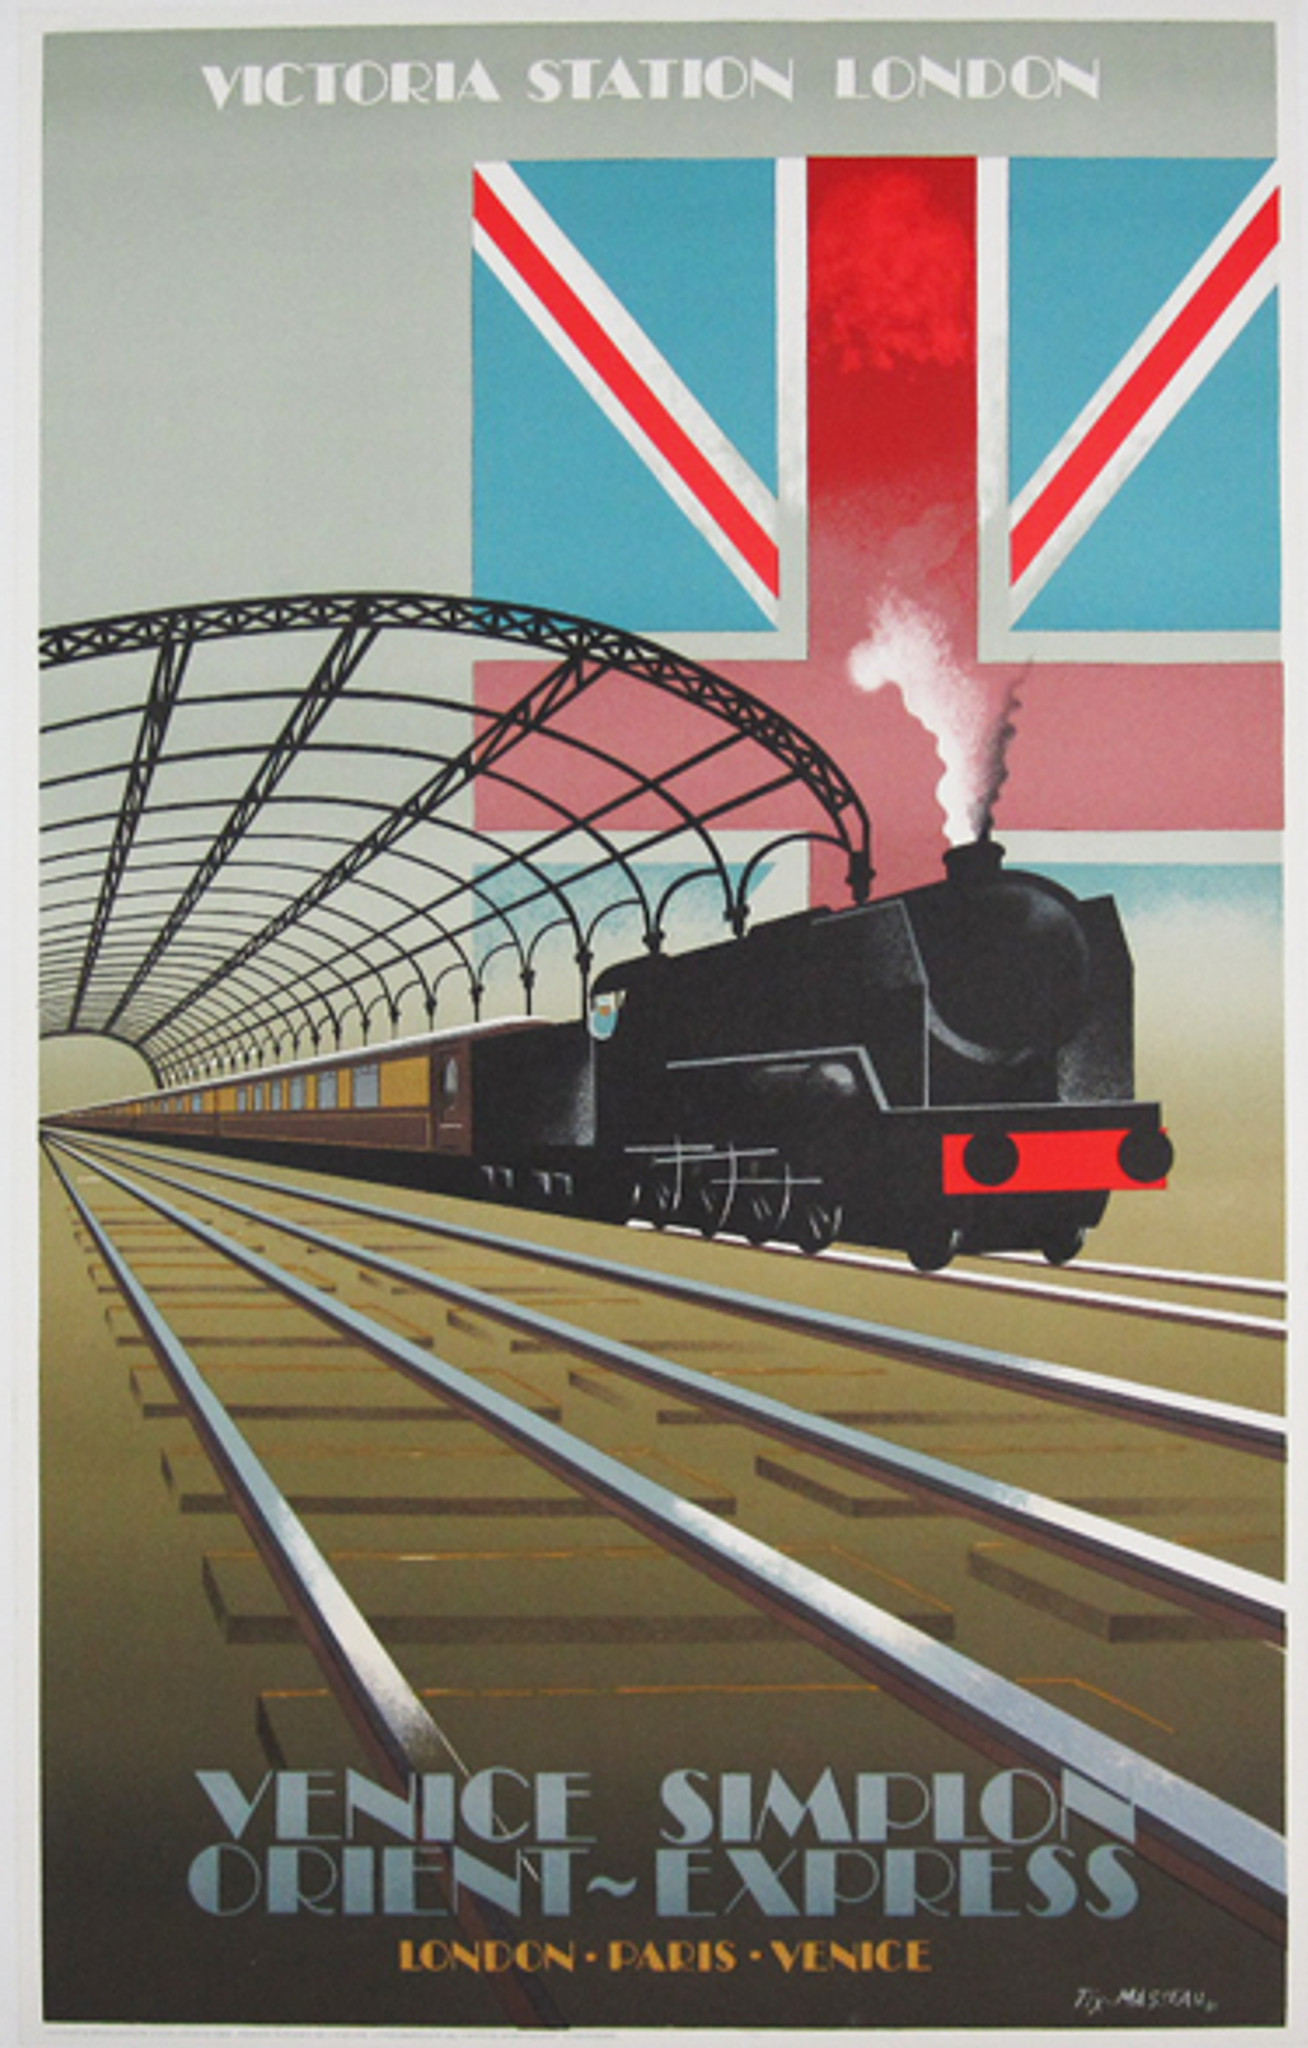 Orient Express Victoria Station London poster